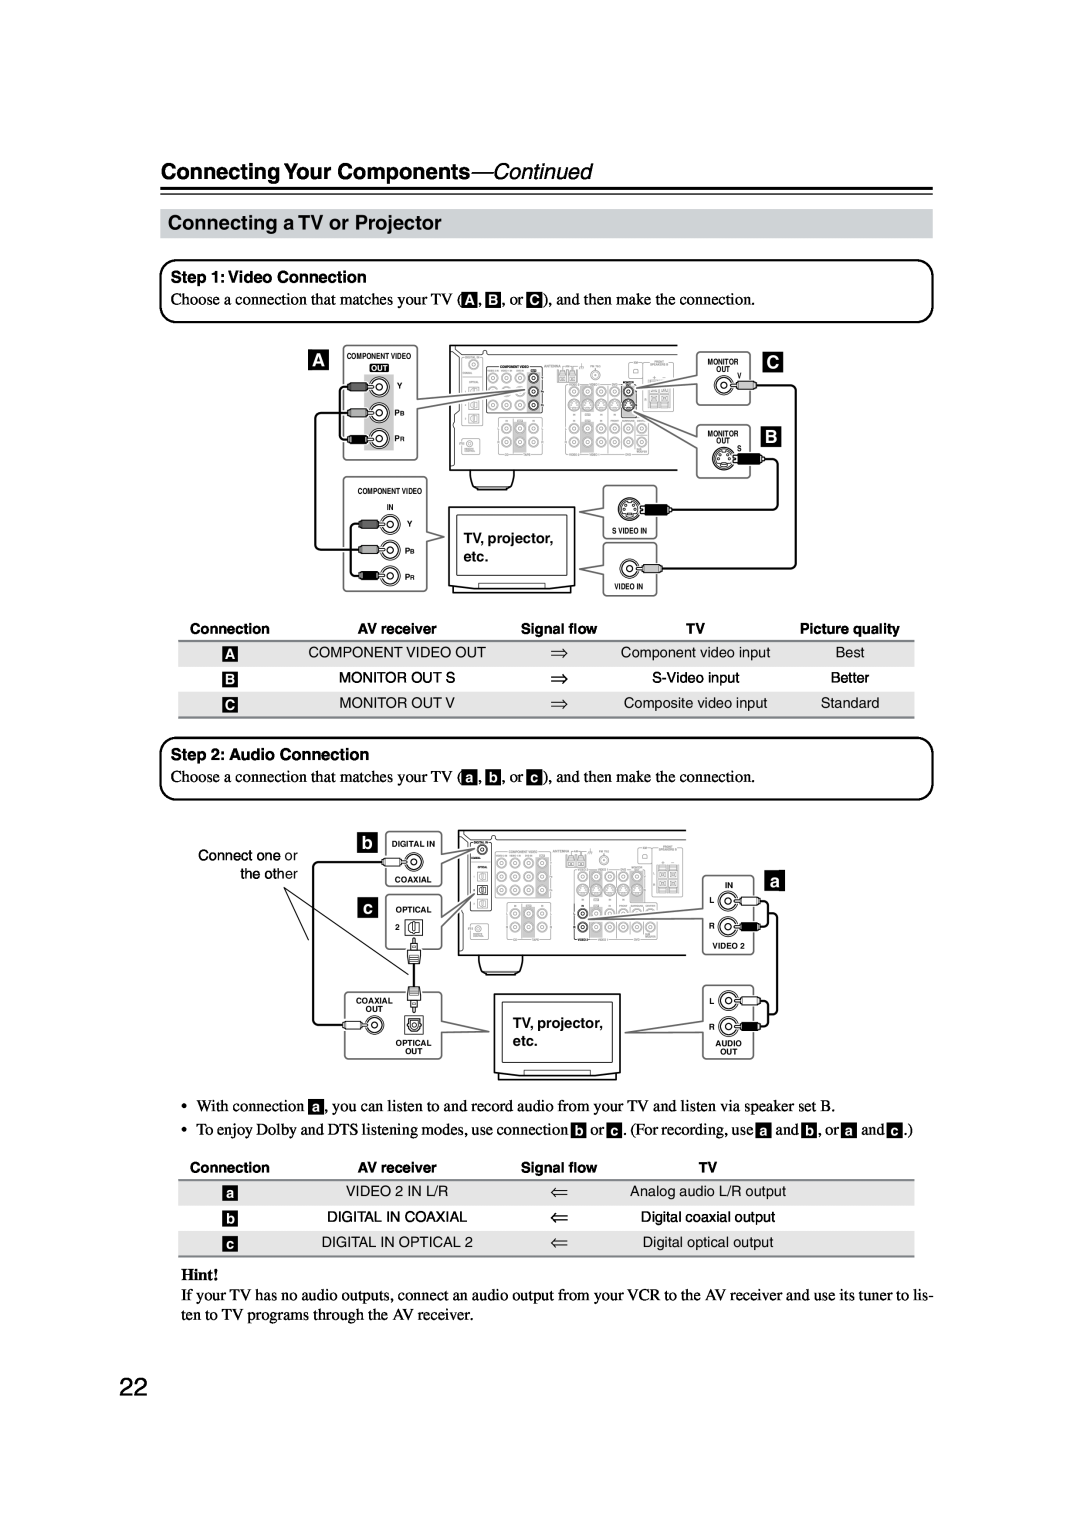 Onkyo TX-SR573 instruction manual Connecting a TV or Projector, Connecting Your Components—Continued, Hint 